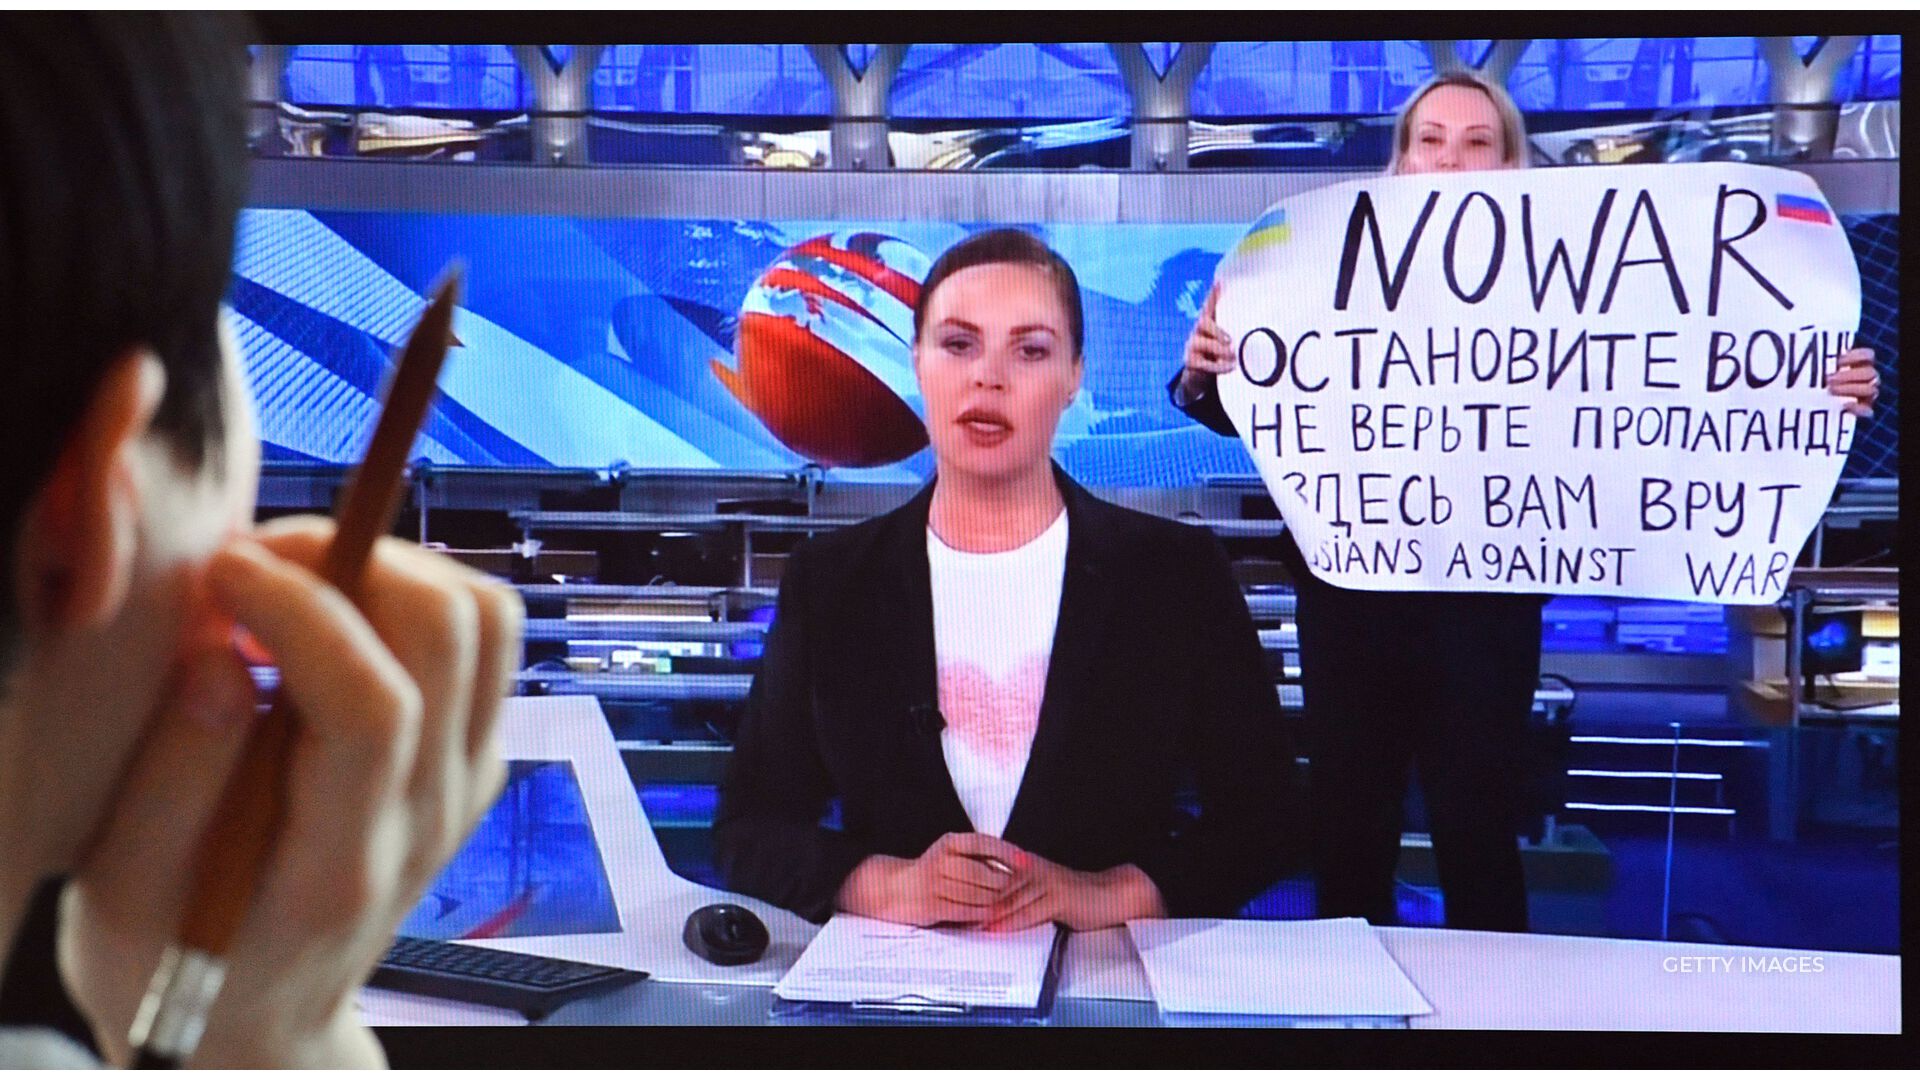 A Russian state TV employee was fined for her anti-war protest.